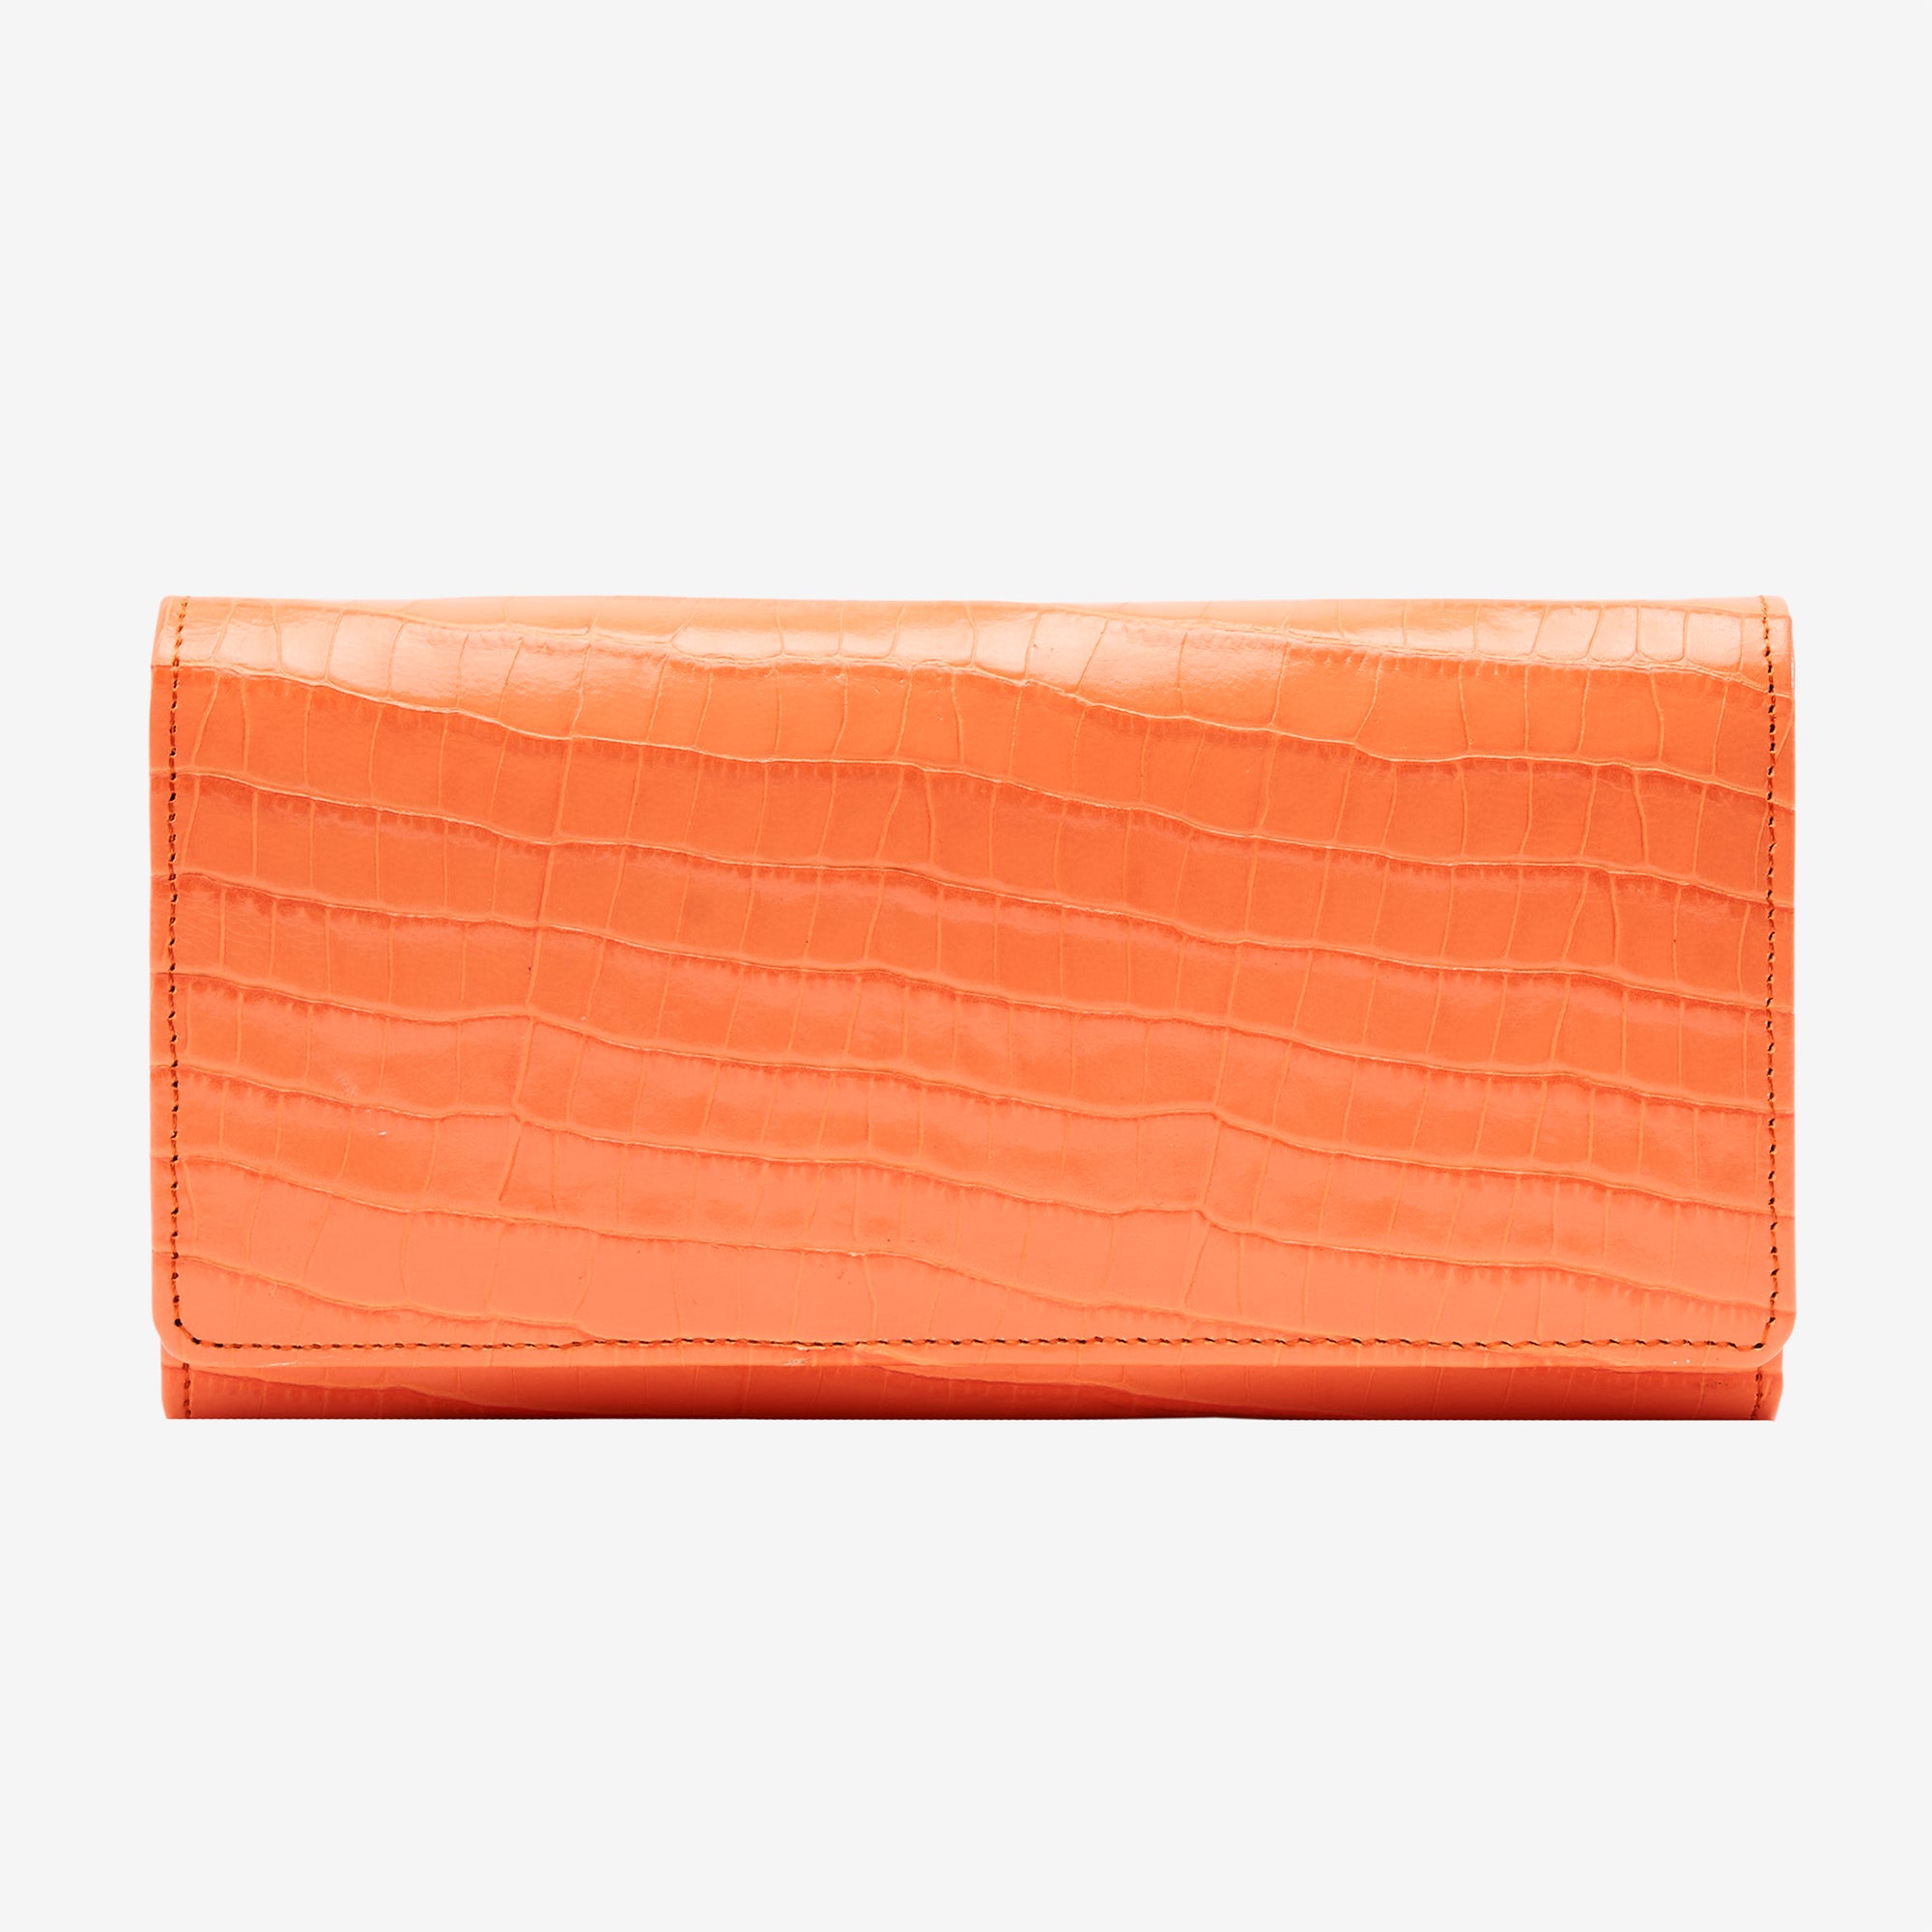       tusk-376-embossed-croco-leather-snap-over-wallet-coral-front